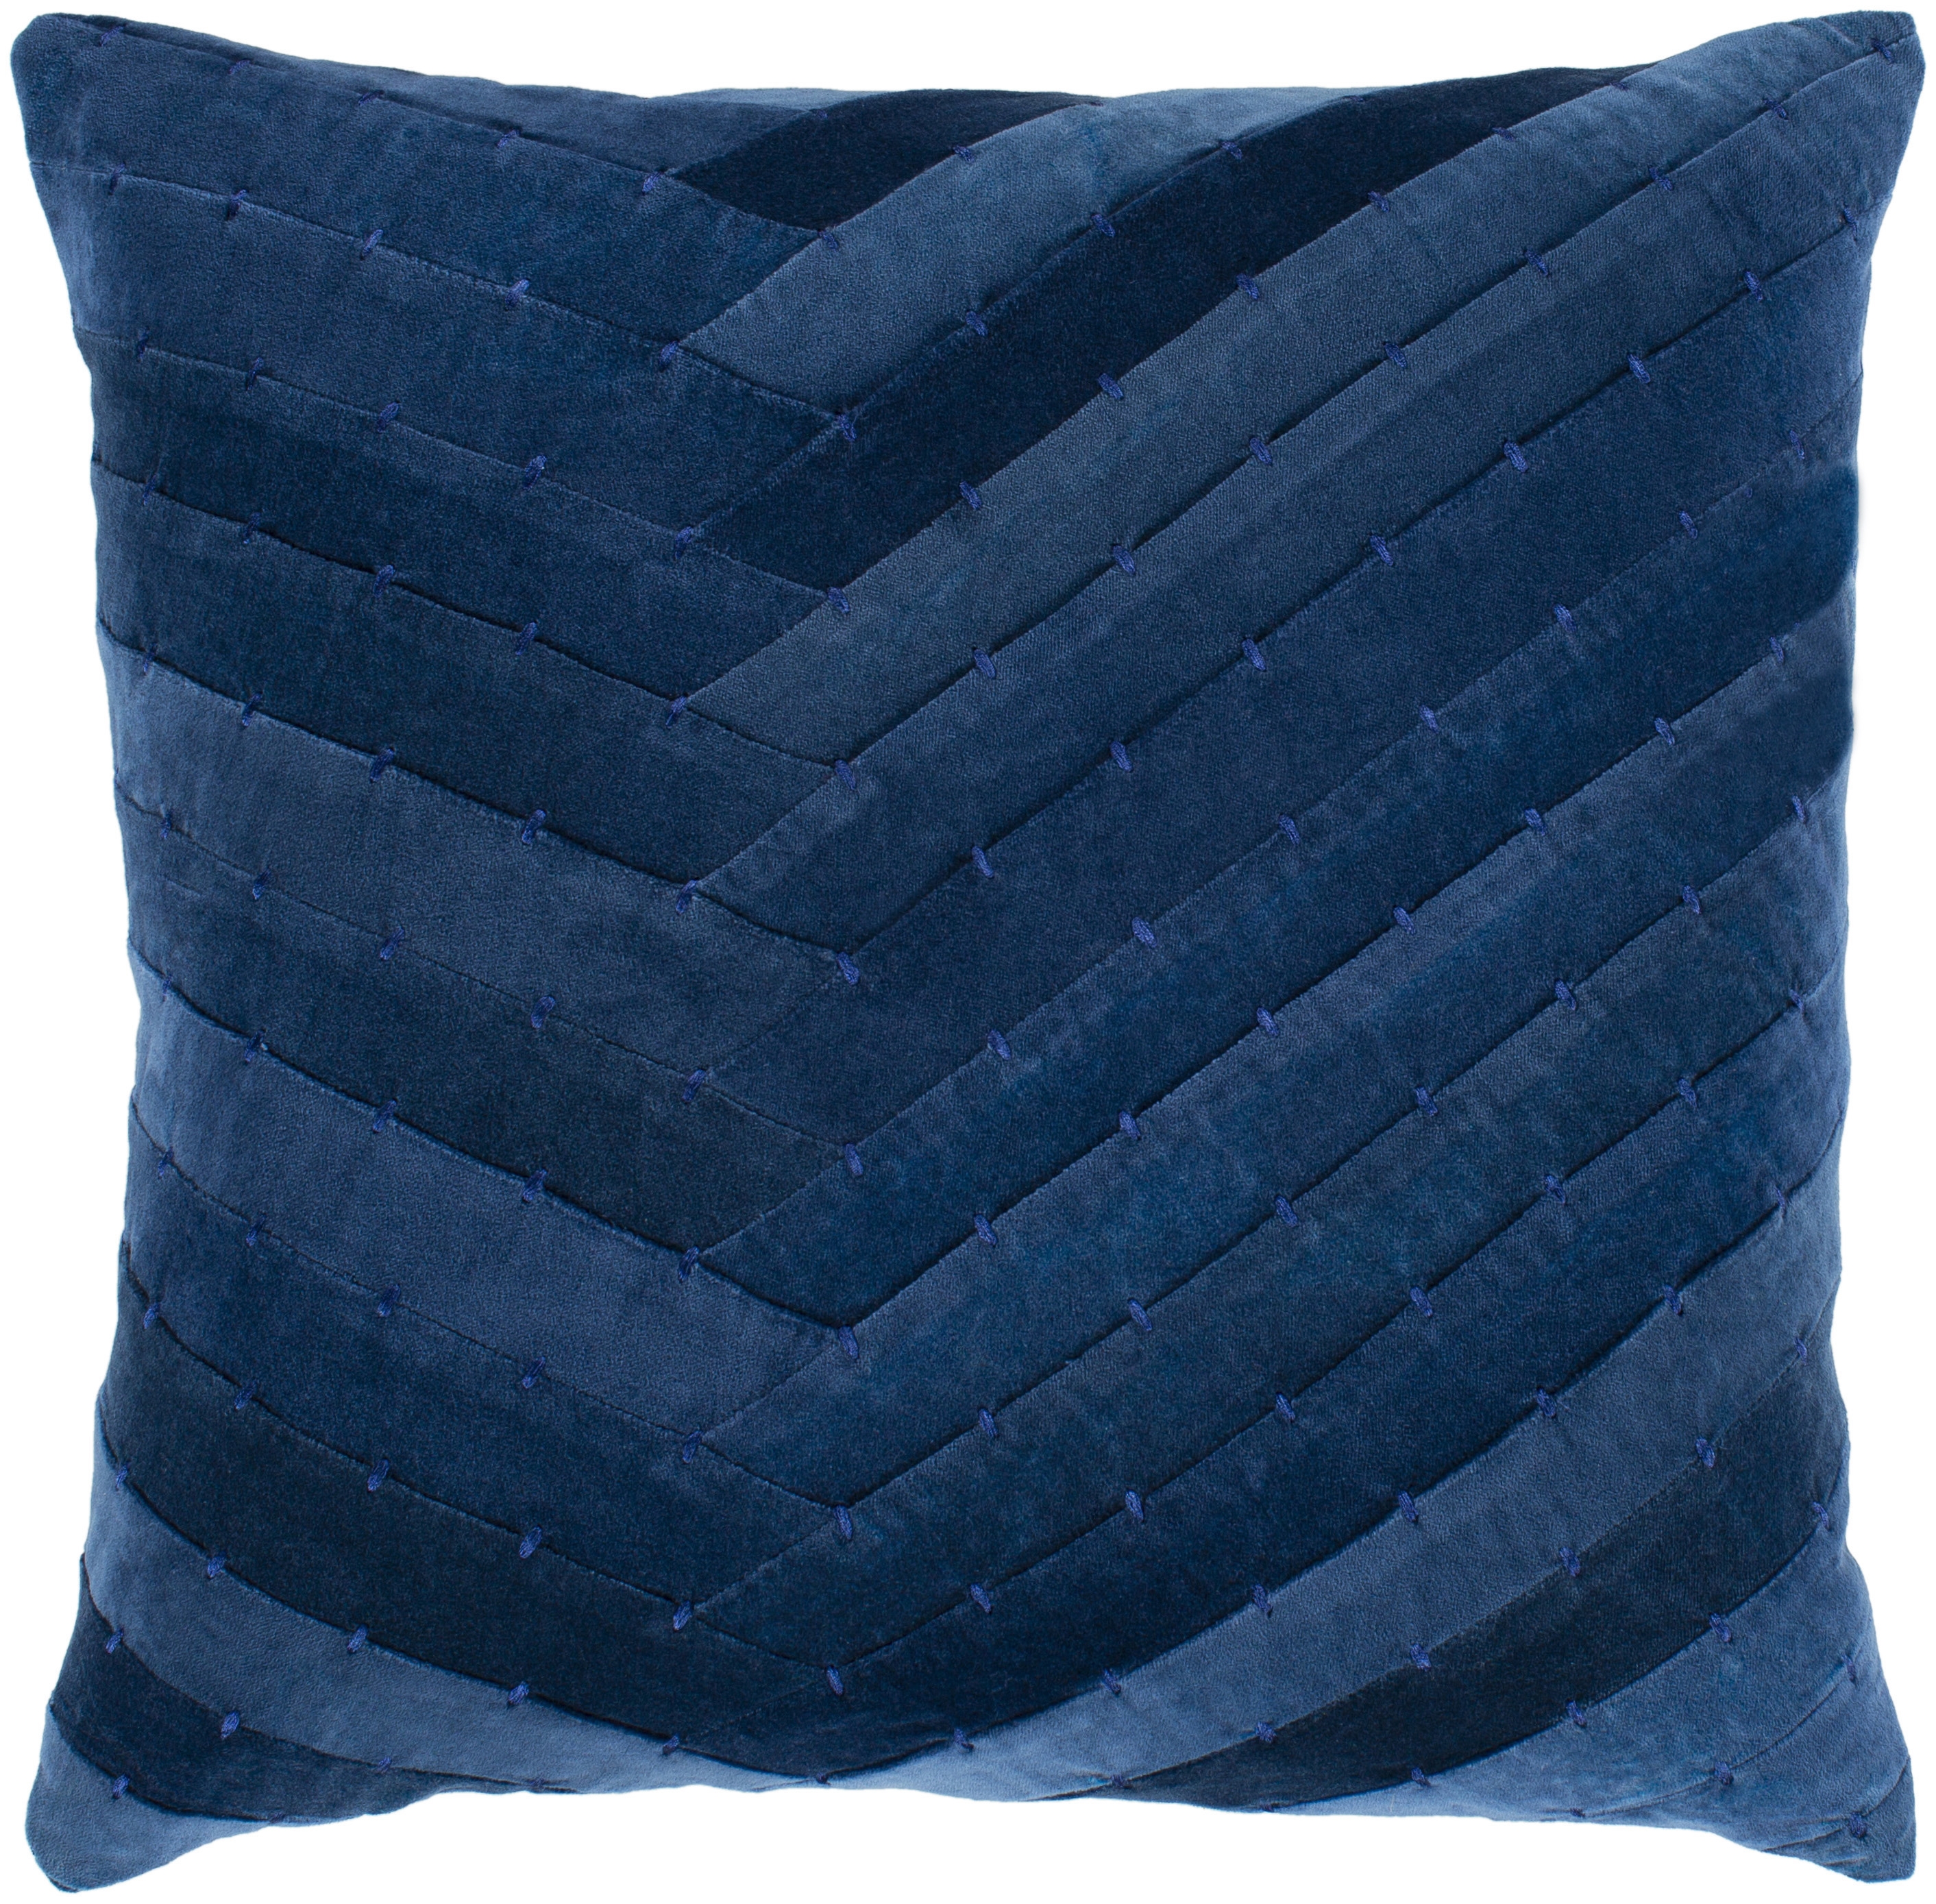 Aviana Throw Pillow, 22" x 22", with down insert - Image 0